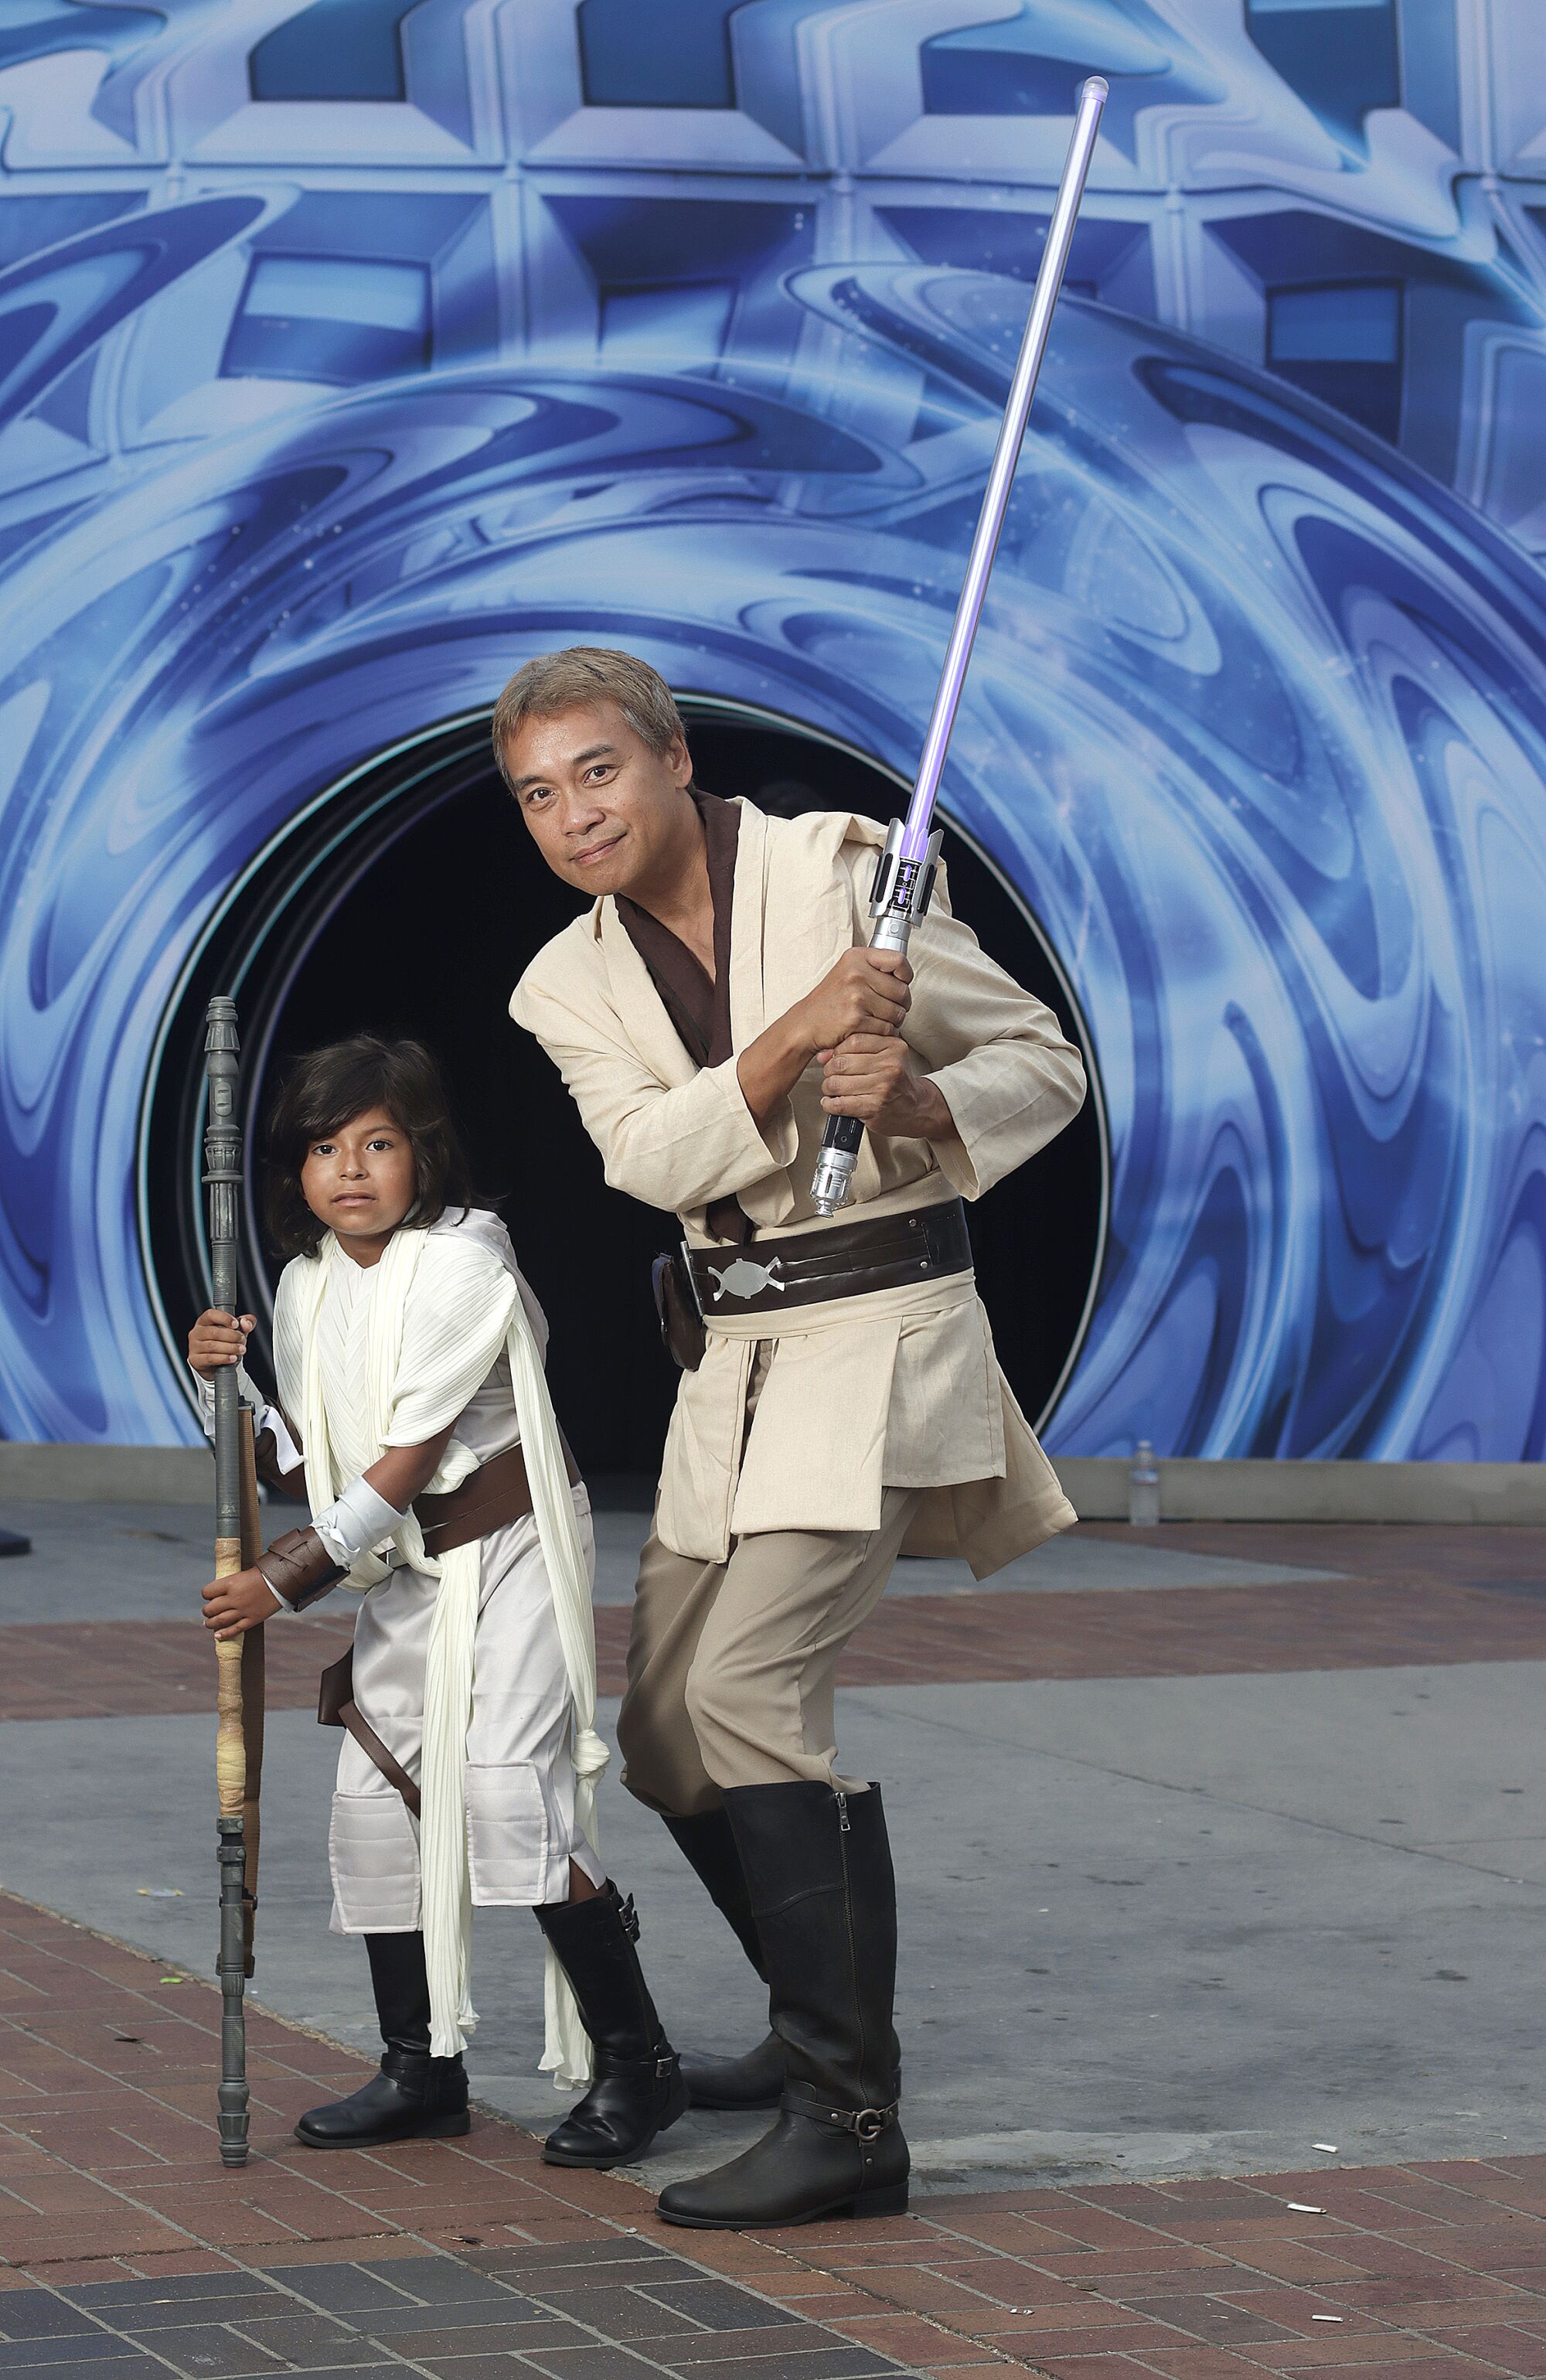 A man and his daughter dressed as Star Wars characters